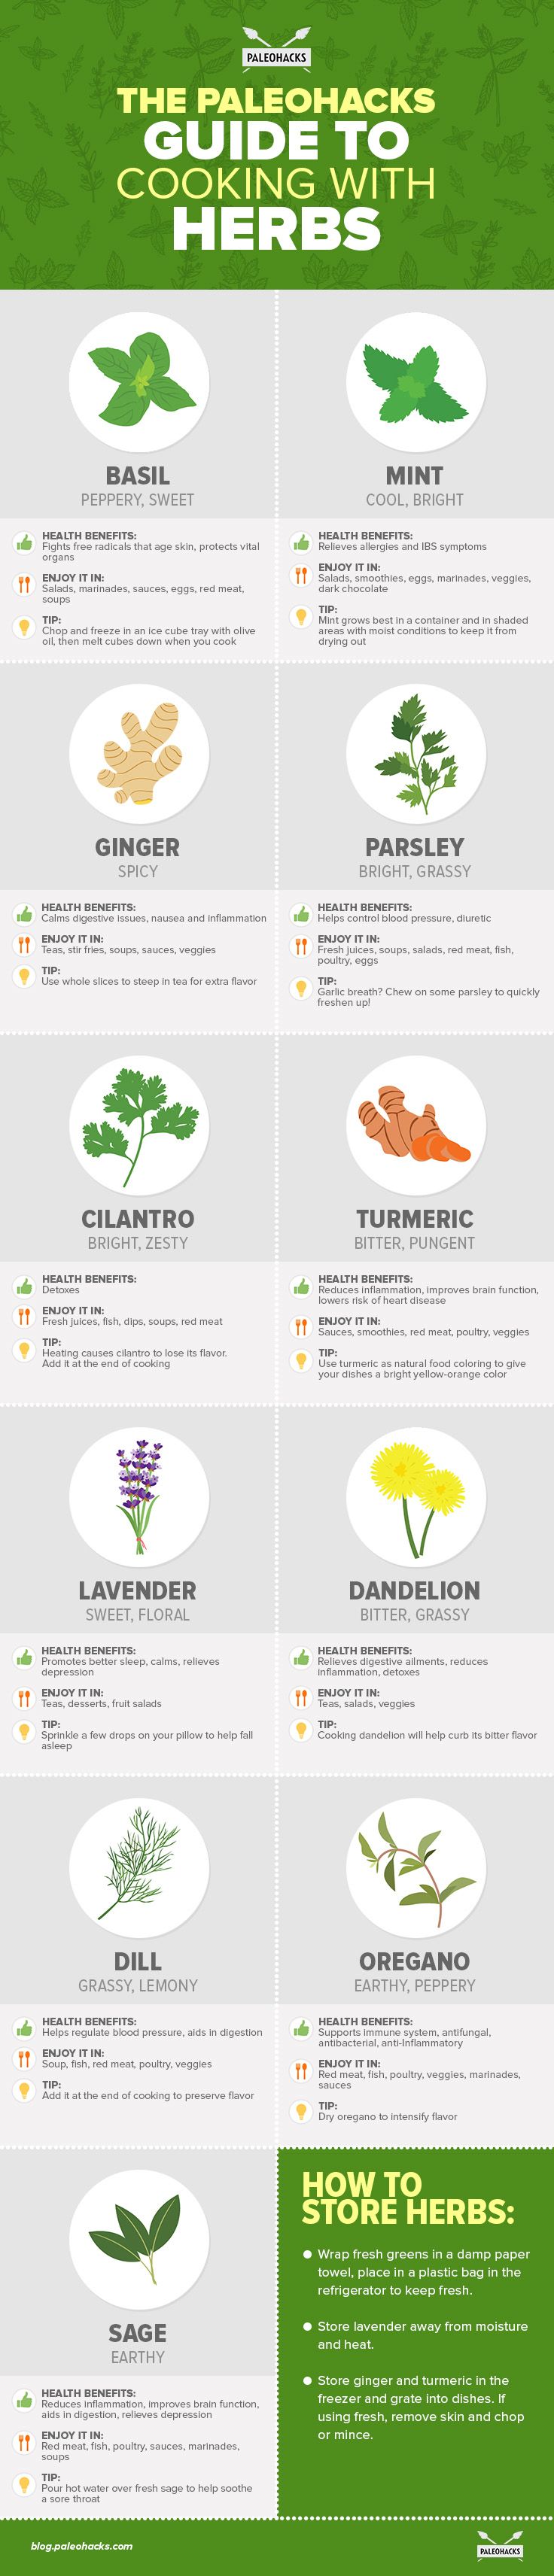 The_PaleoHacks_Guide_to_Cooking_with_Herbs-infog-updated